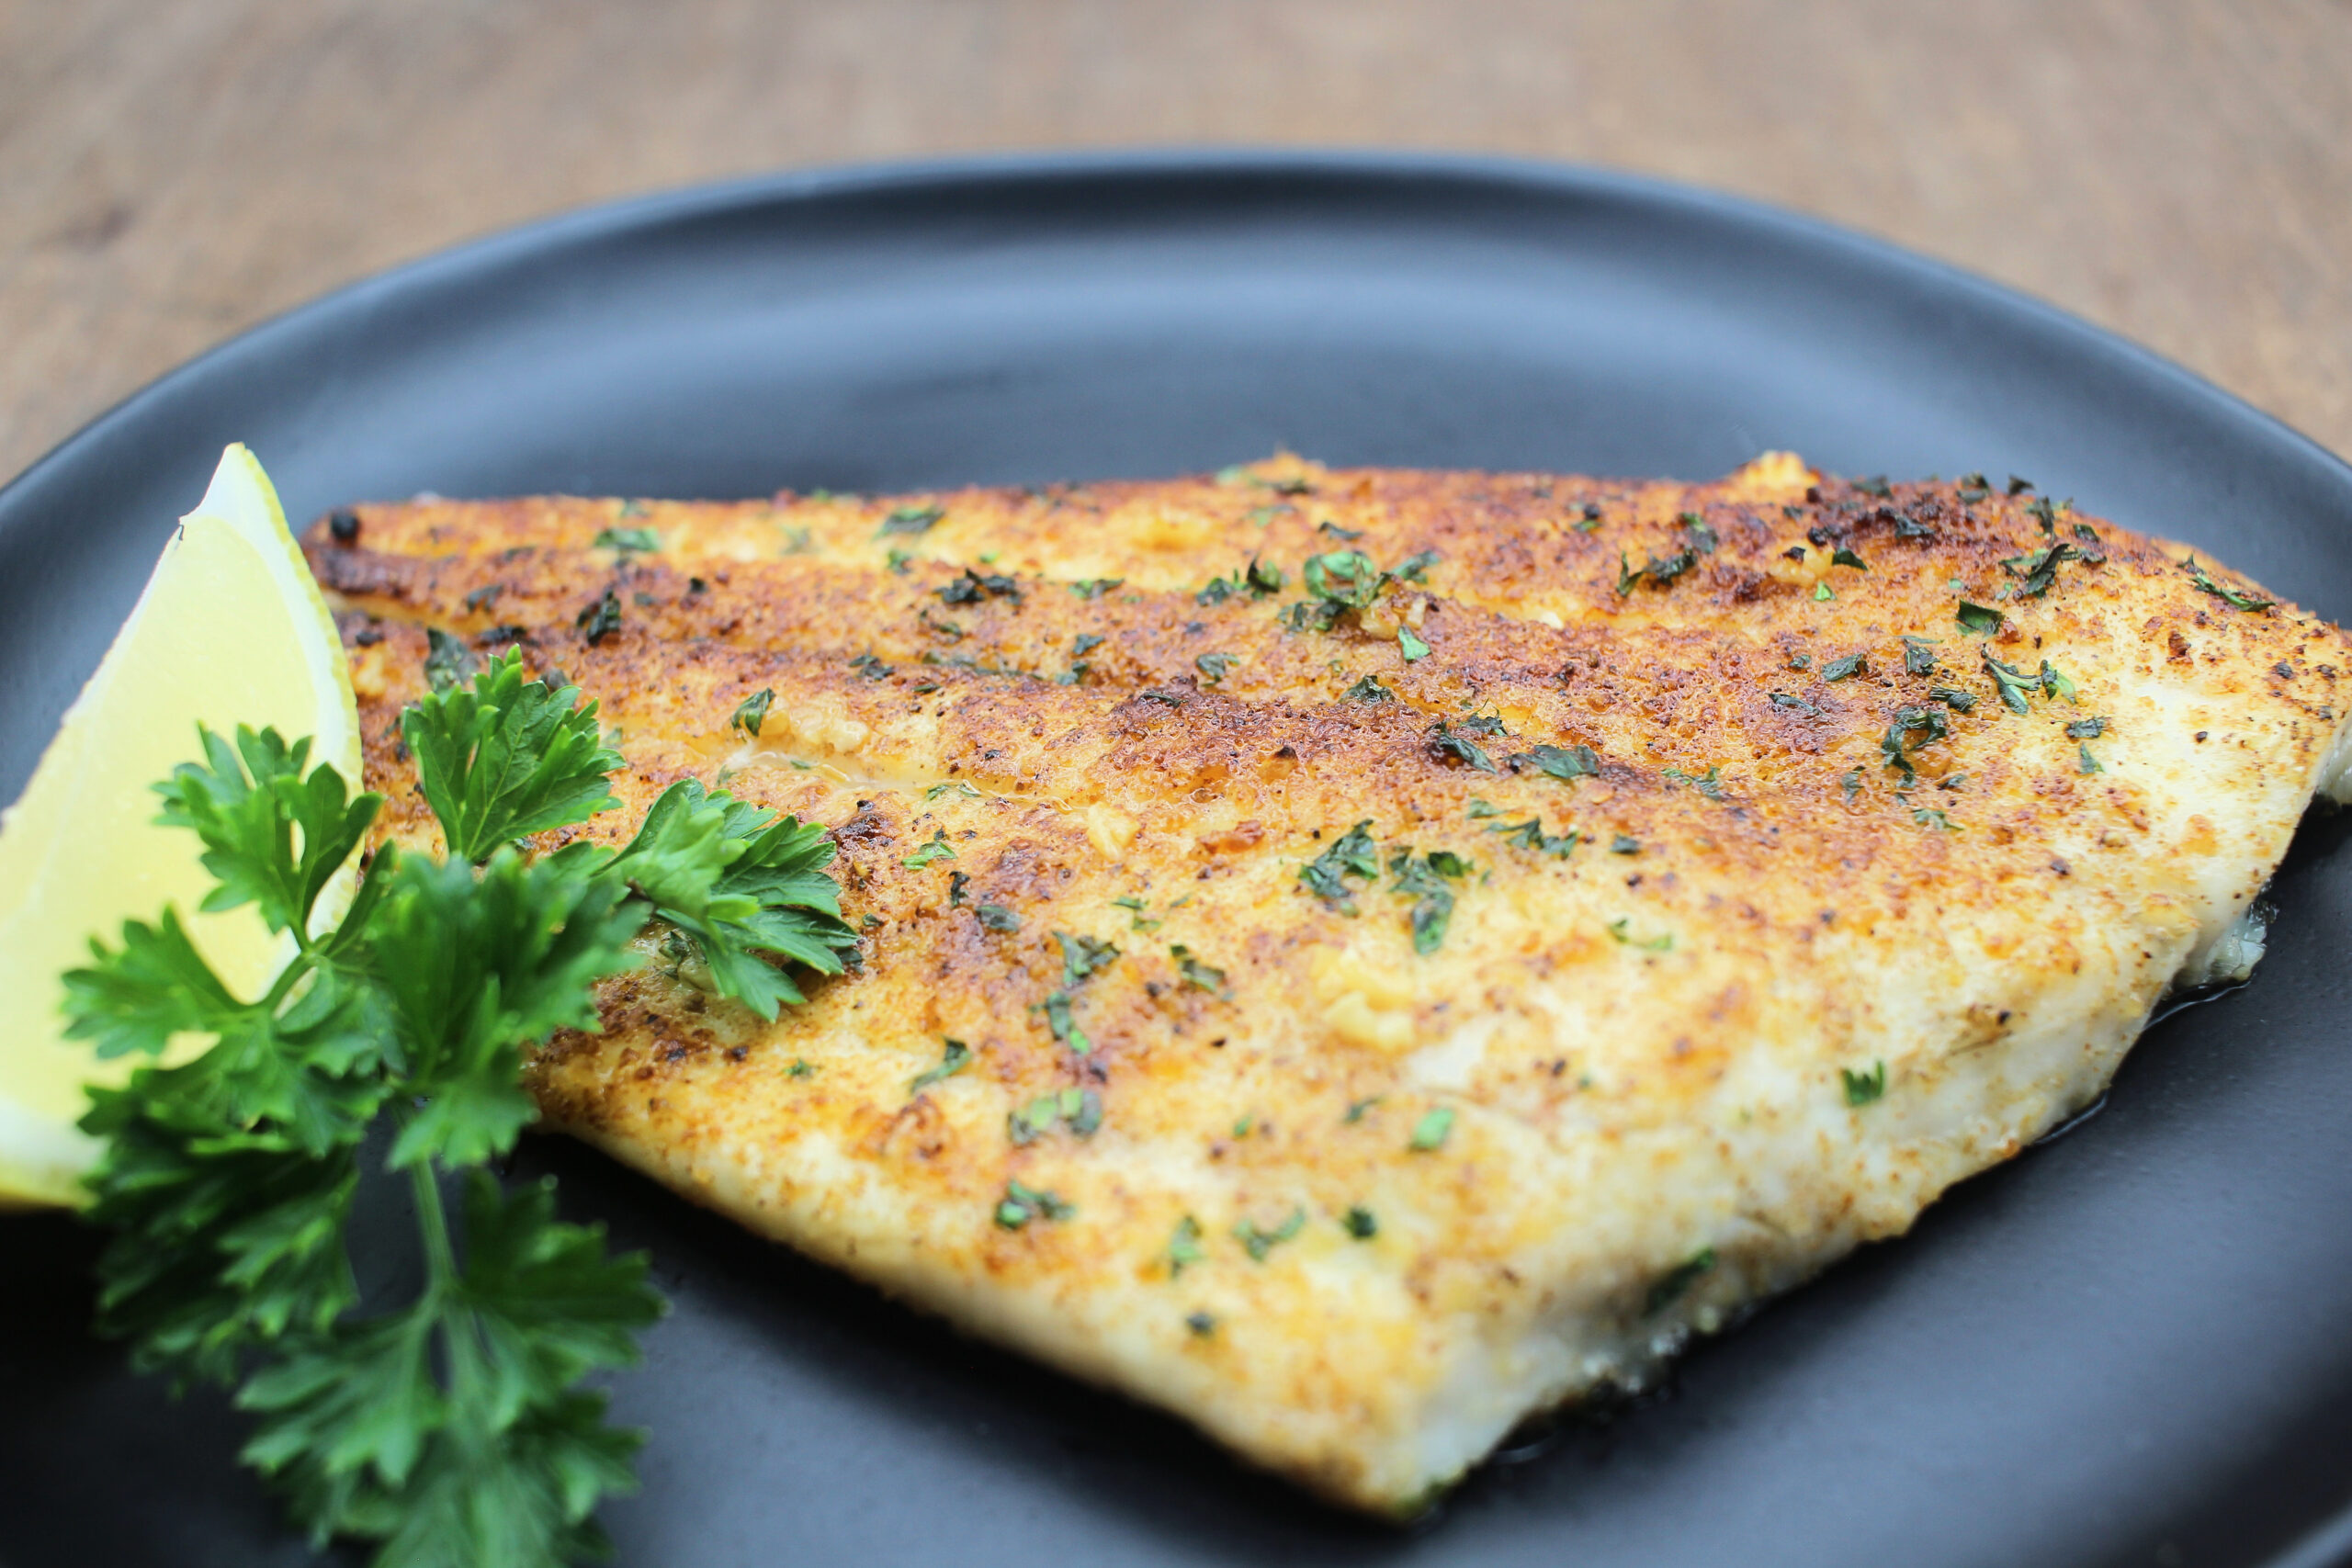 Broiled fish fillet with garlic and parsley.